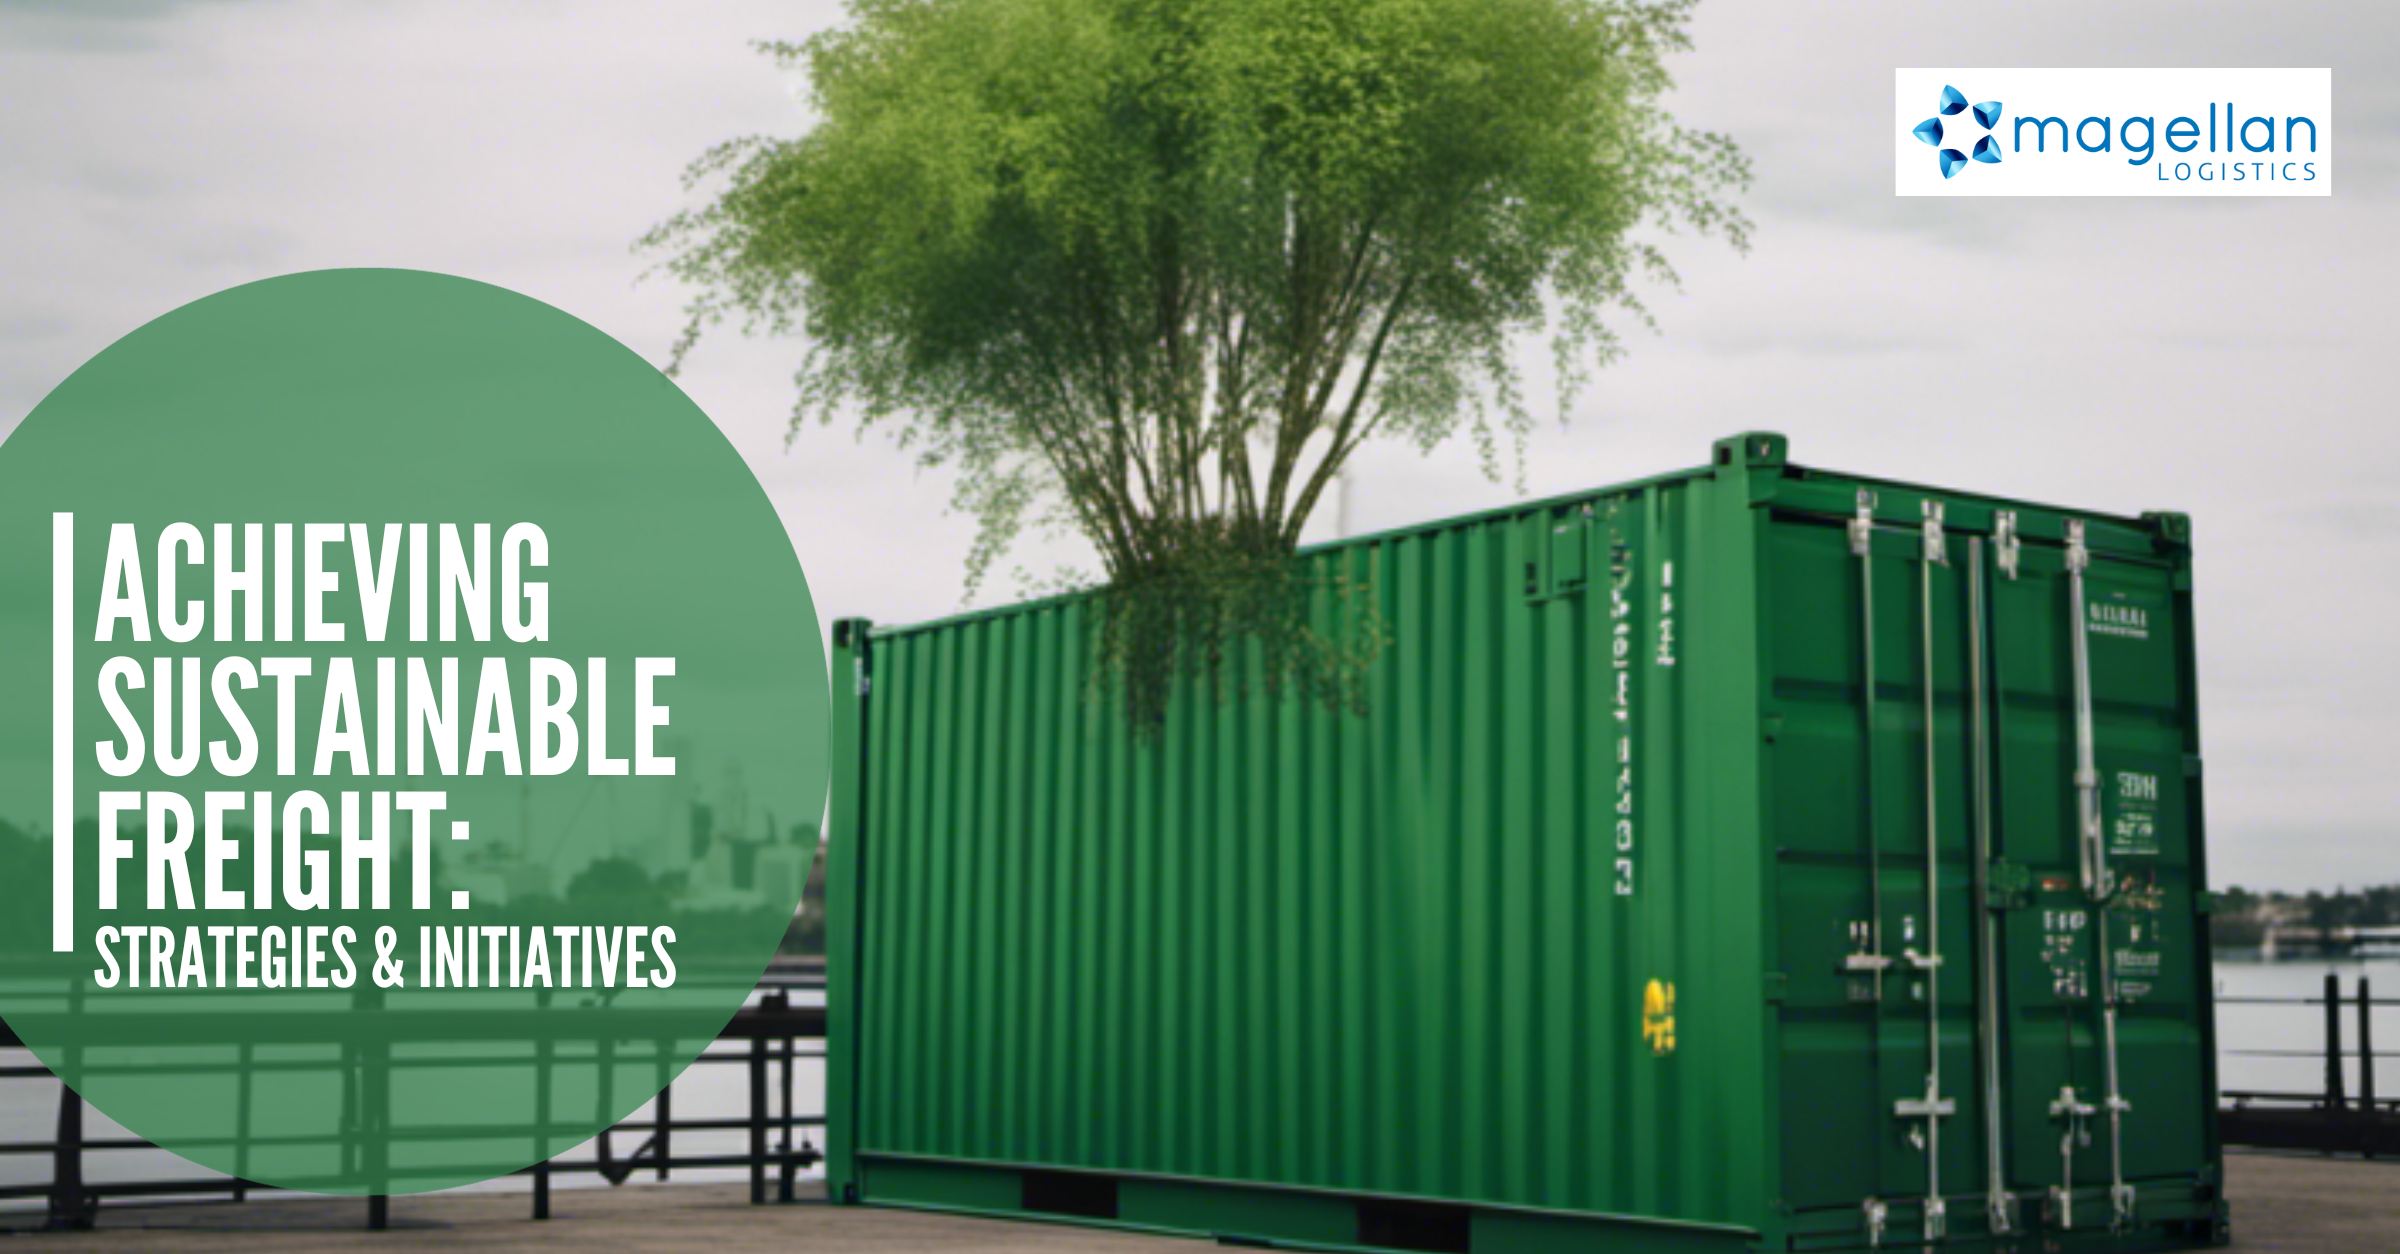 Sustainable Freight. Green shipping container with a small tree growing on top.